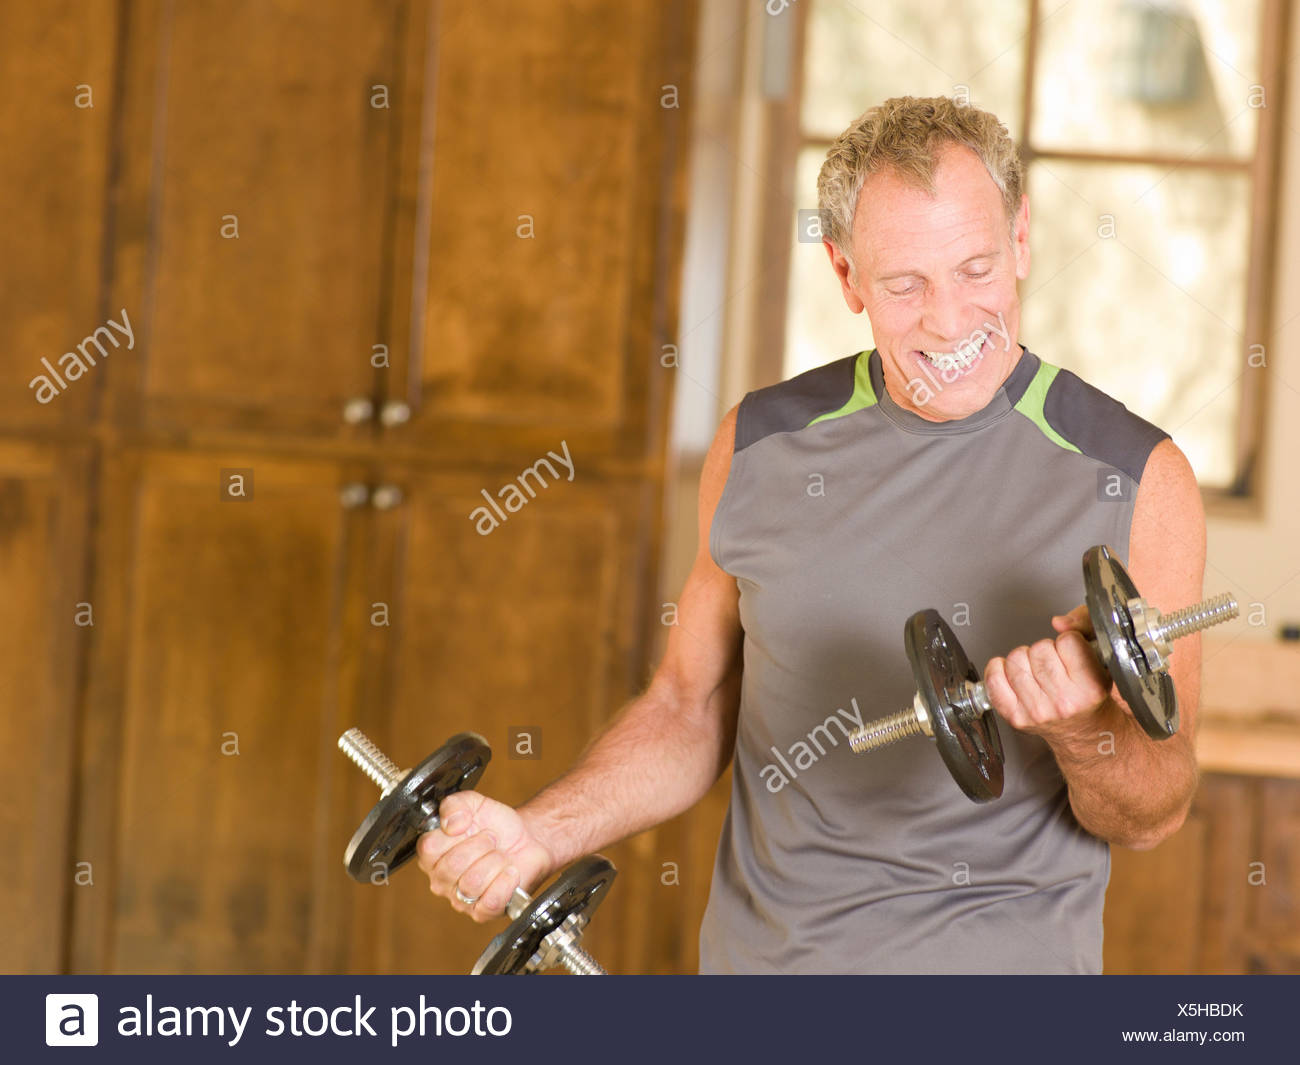 Guy Lifts Weights In Living Room